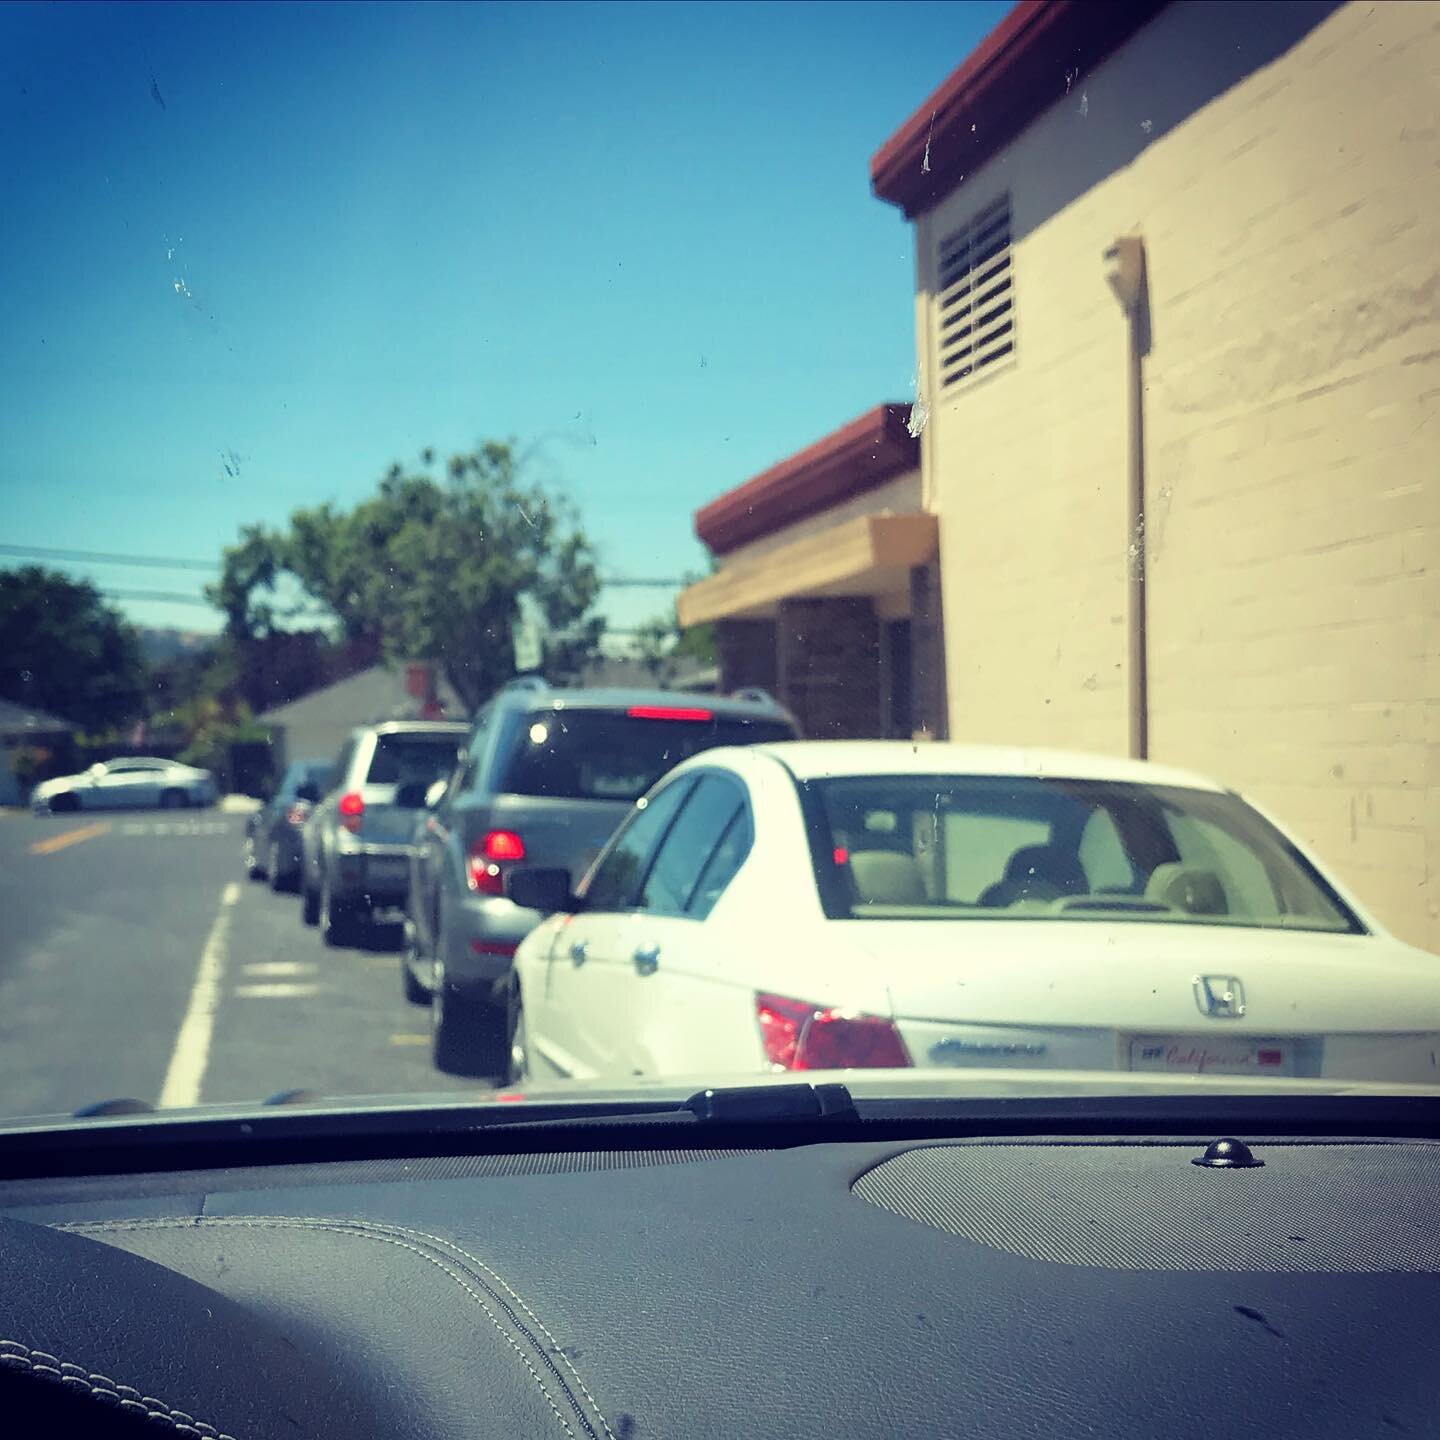 Drive-thru queue at the local donation center. Silver lining is Covid-19 brings out the organizer in all of us?